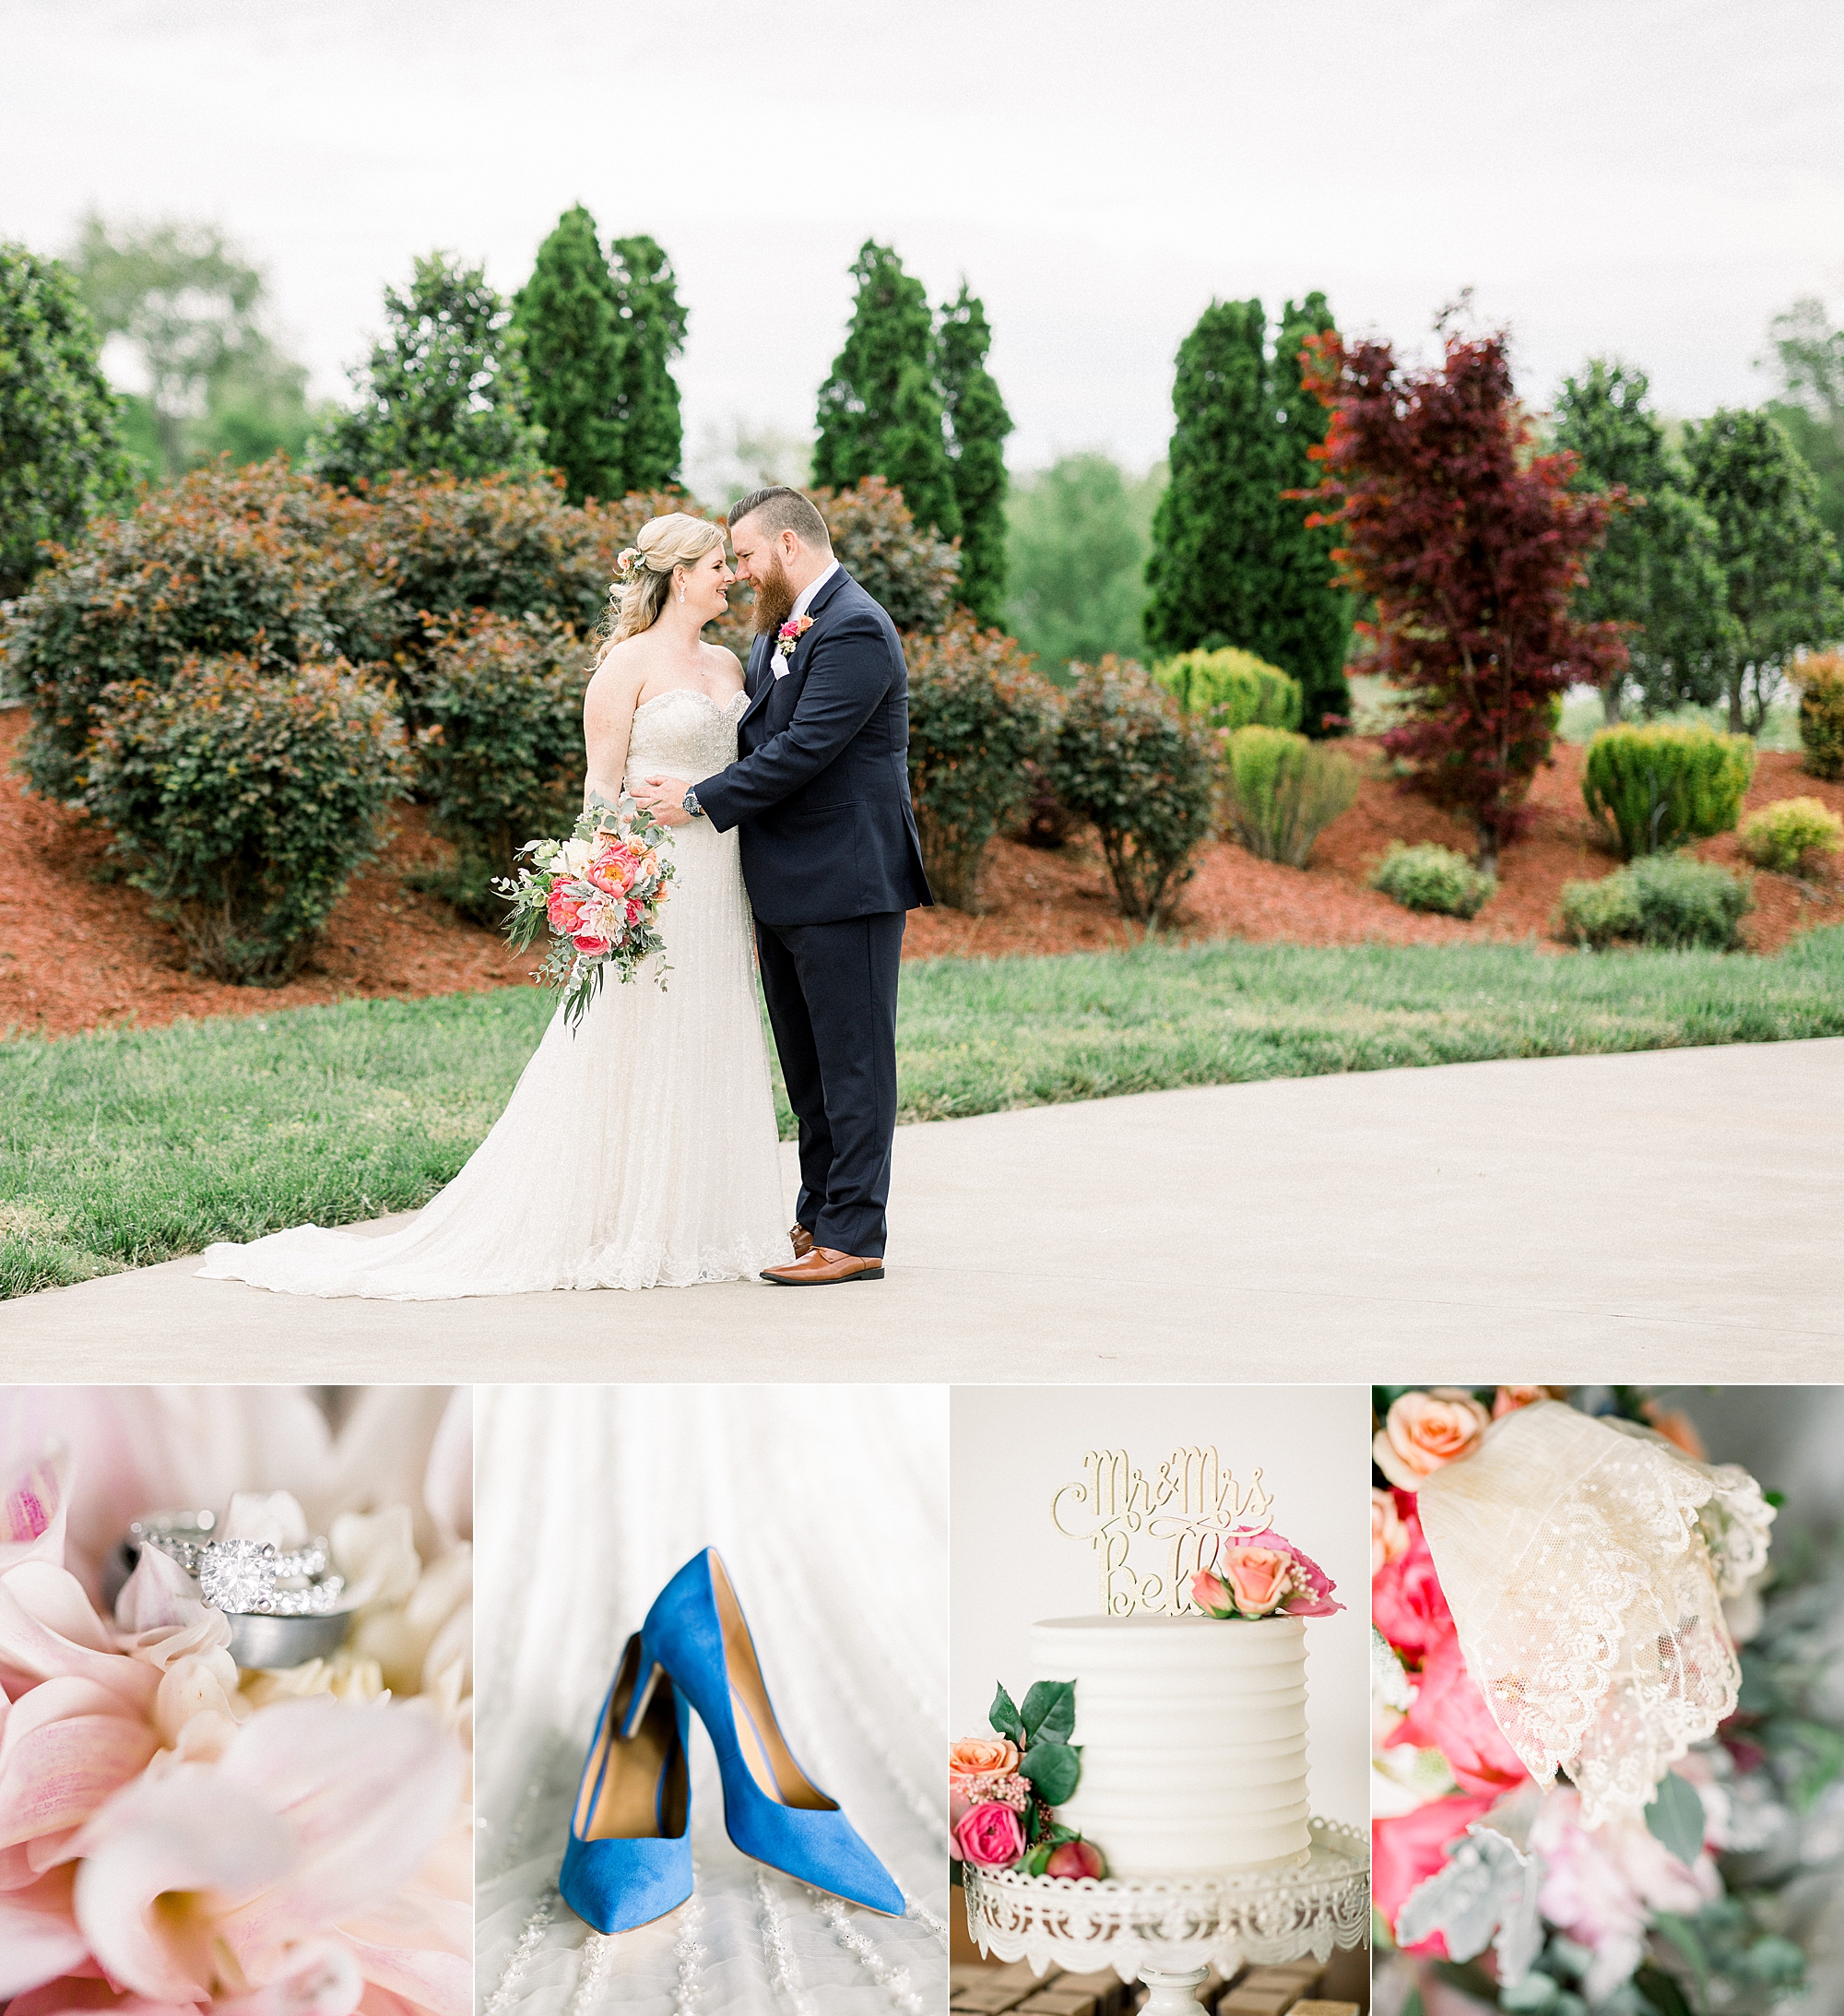 Wedding photo collage from a fun and colorful wedding at Old Glory Distillery in Clarksville, TN with blue wedding heels and bright pink flowers